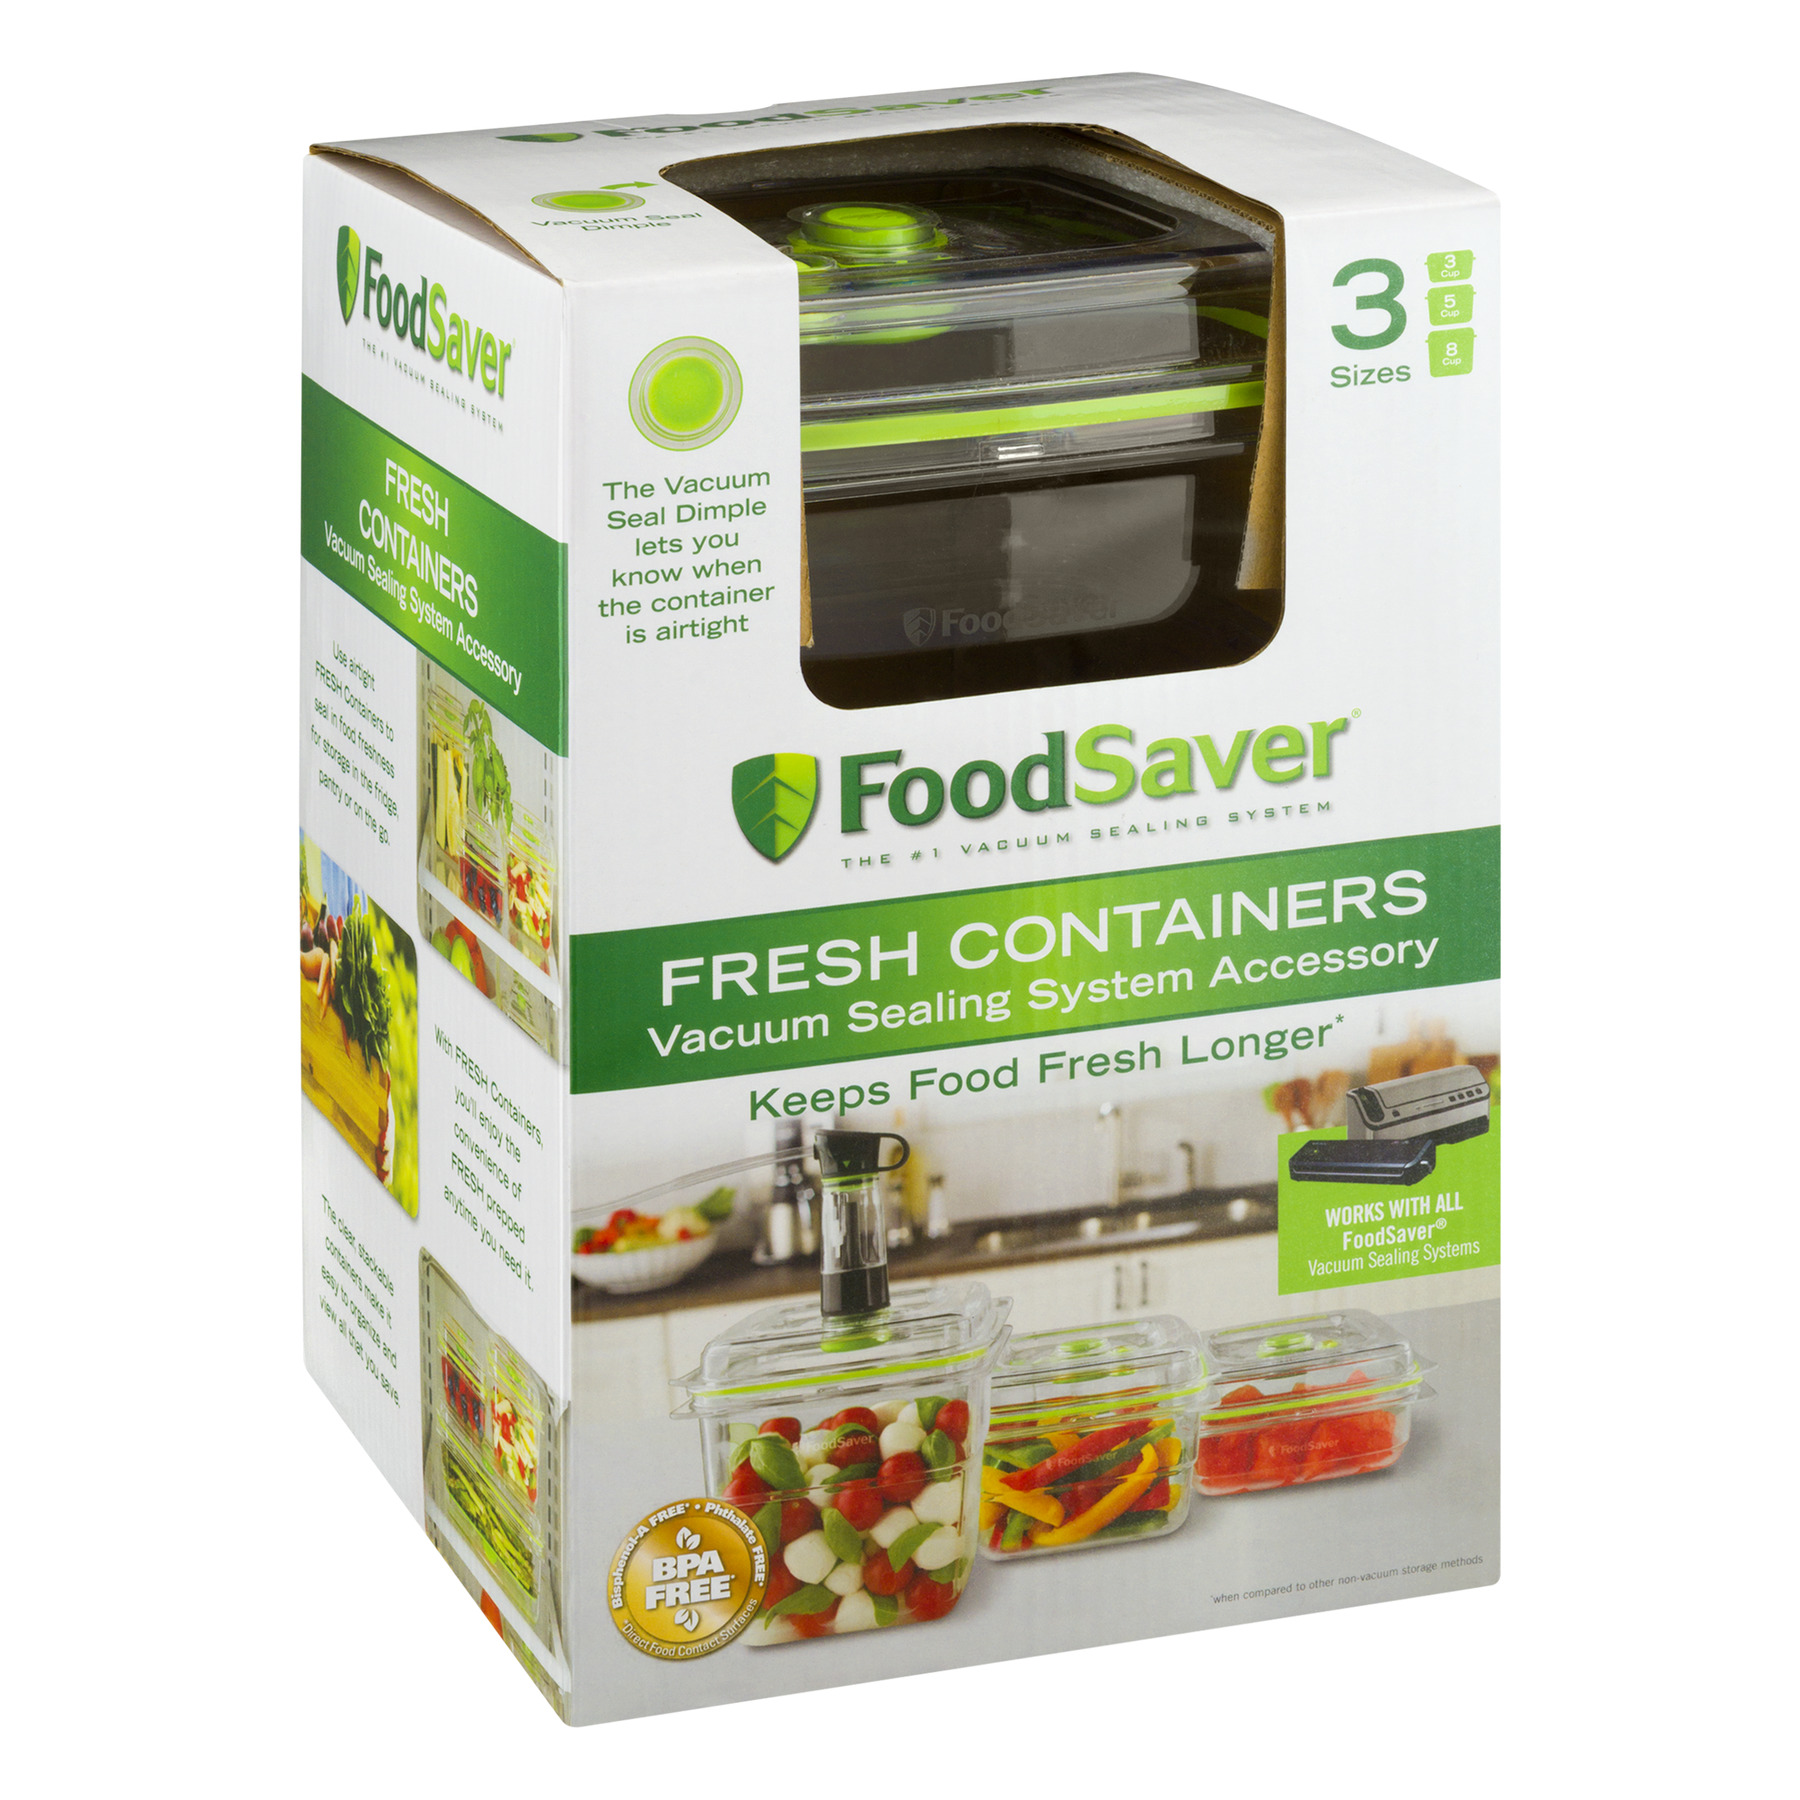 FoodSaver FA3SC358-000 3-Pc. Fresh Containers Set - Food Storage - image 3 of 14